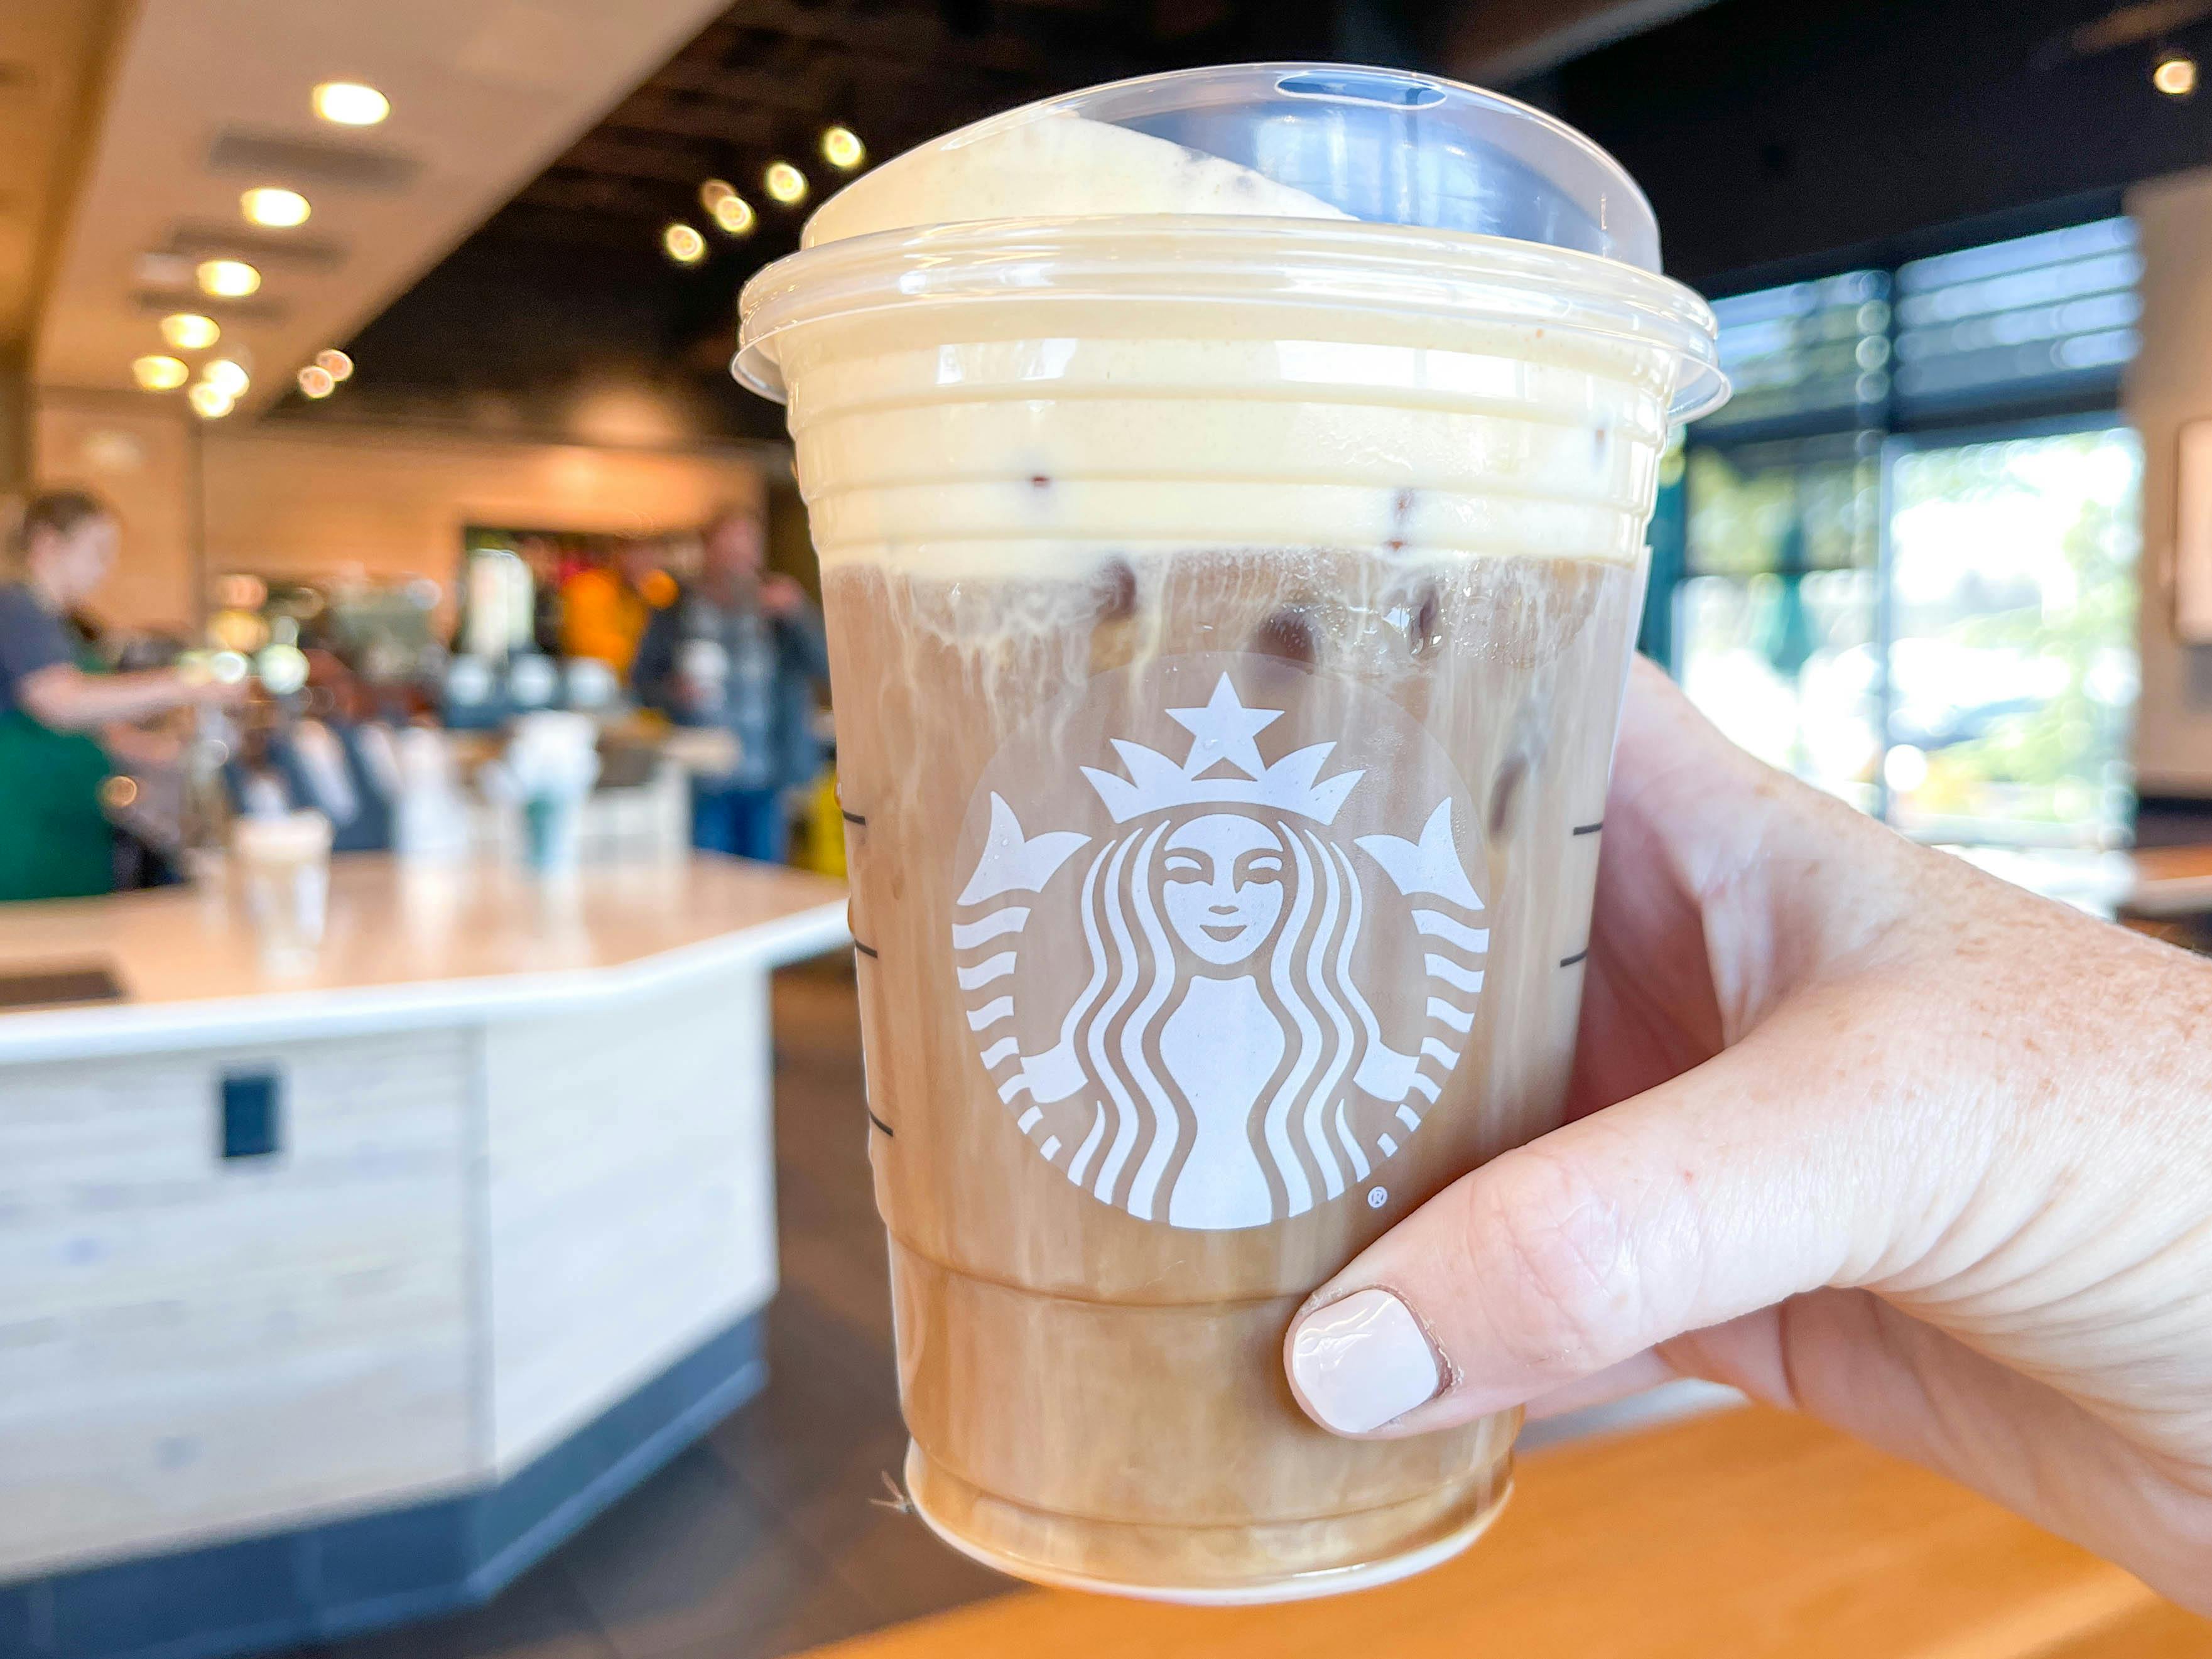 a person grabing a starbucks drink on counter 